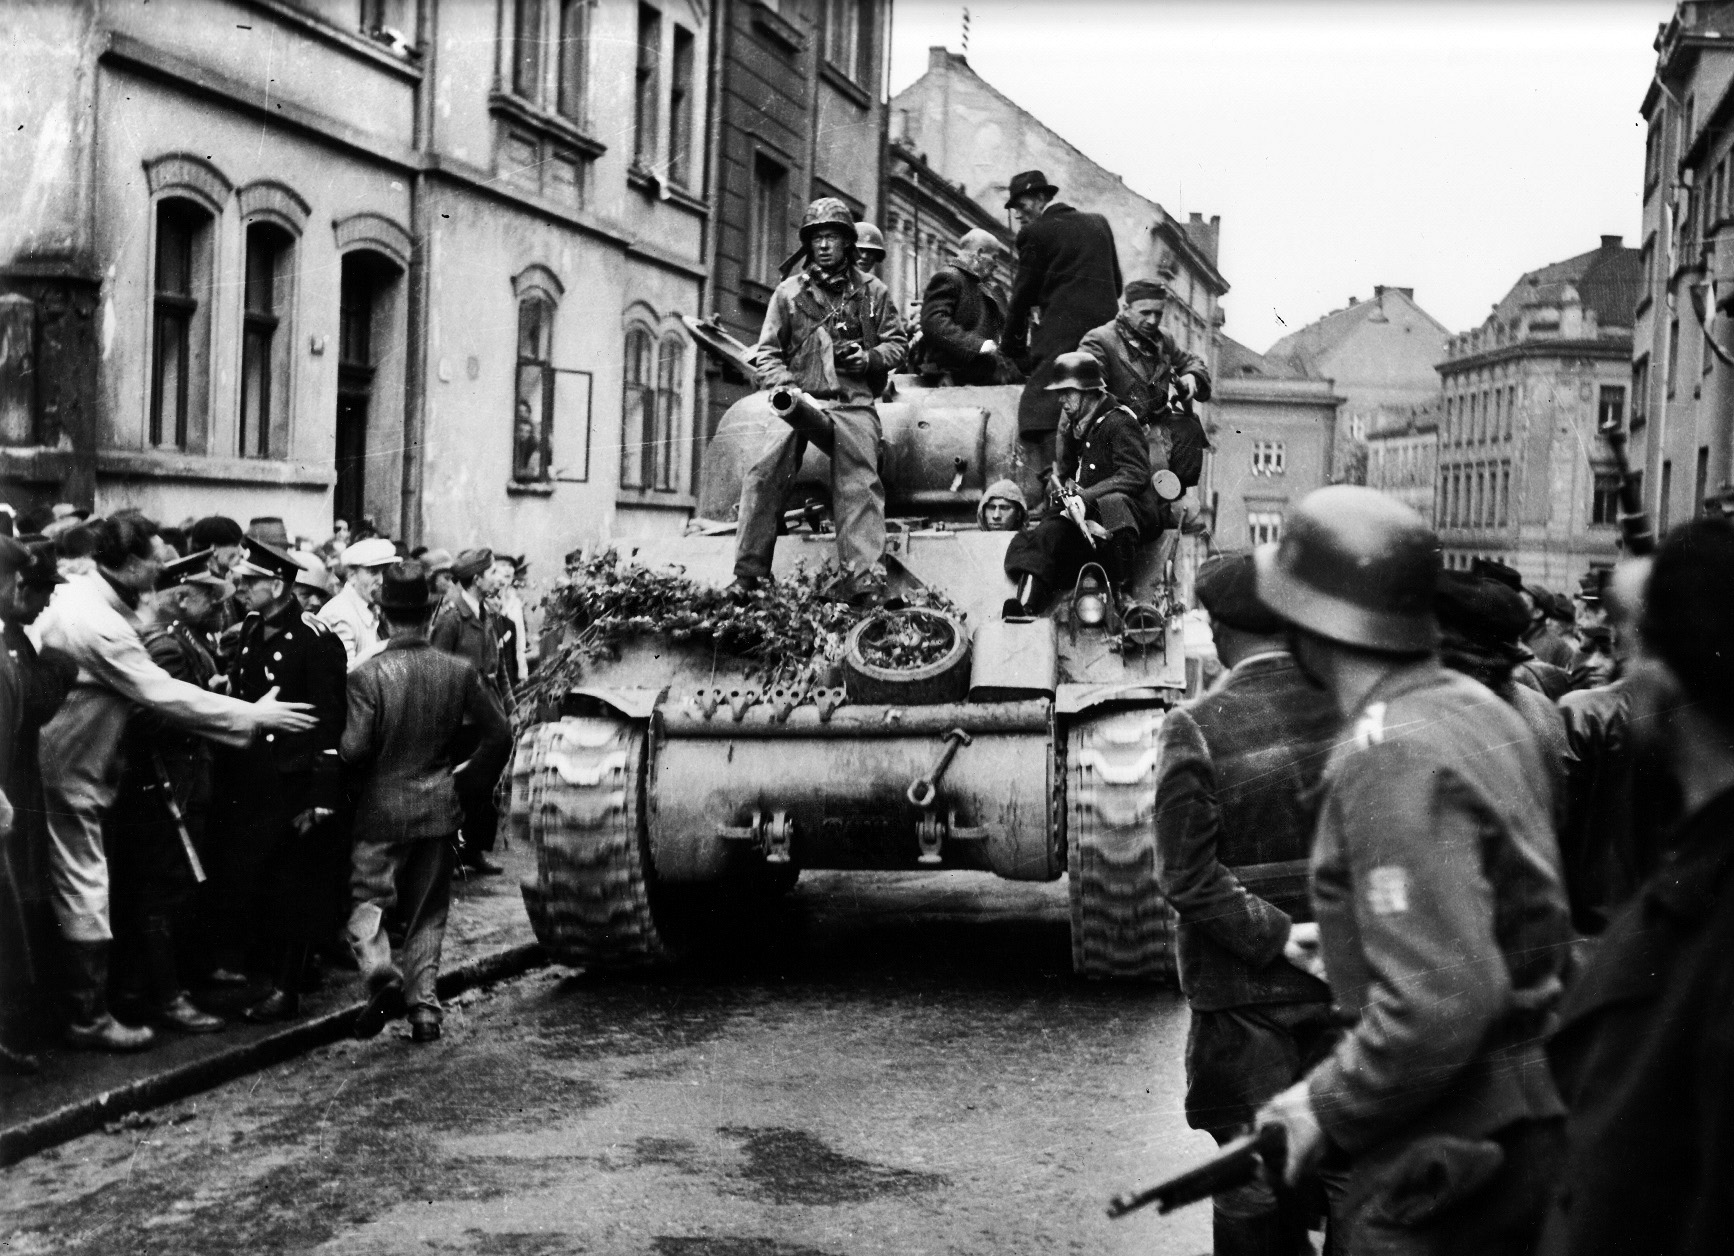 Local partisans in captured German uniforms watch as an American Sherman tank, with townsfolk on board, rolls through Pilsen following its liberation on May 6, 1945. 